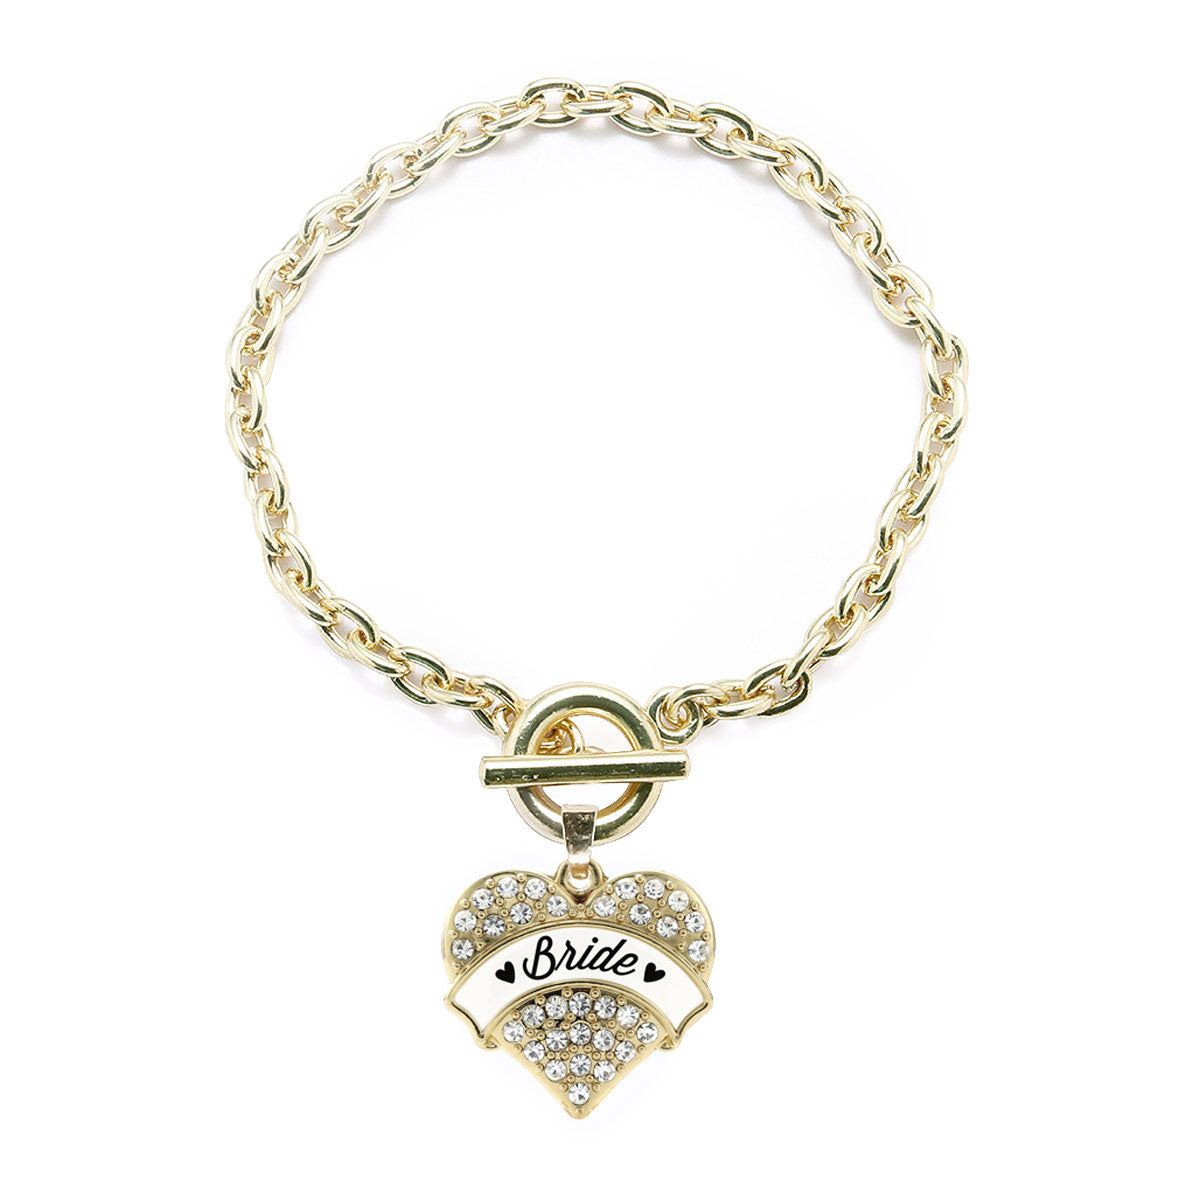 Gold Black and White Bride Pave Heart Charm Toggle Bracelet